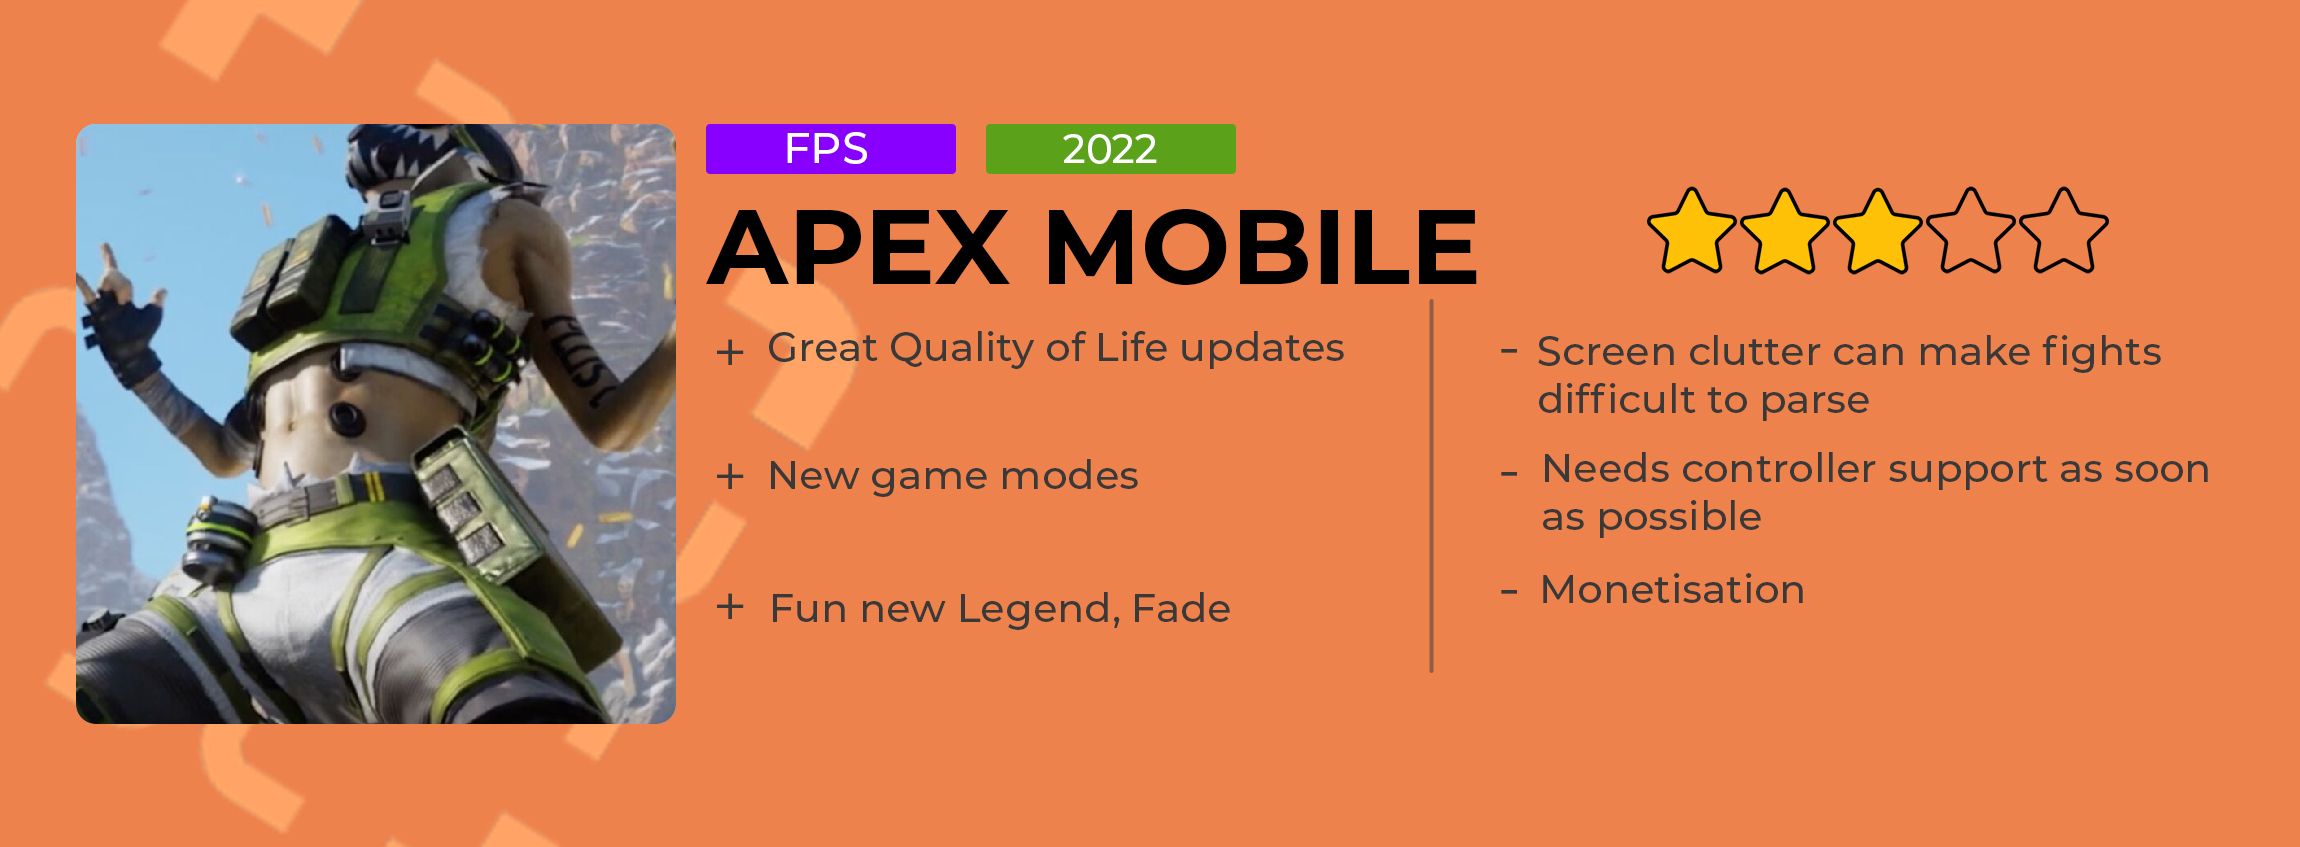 Apex Mobile Review Card